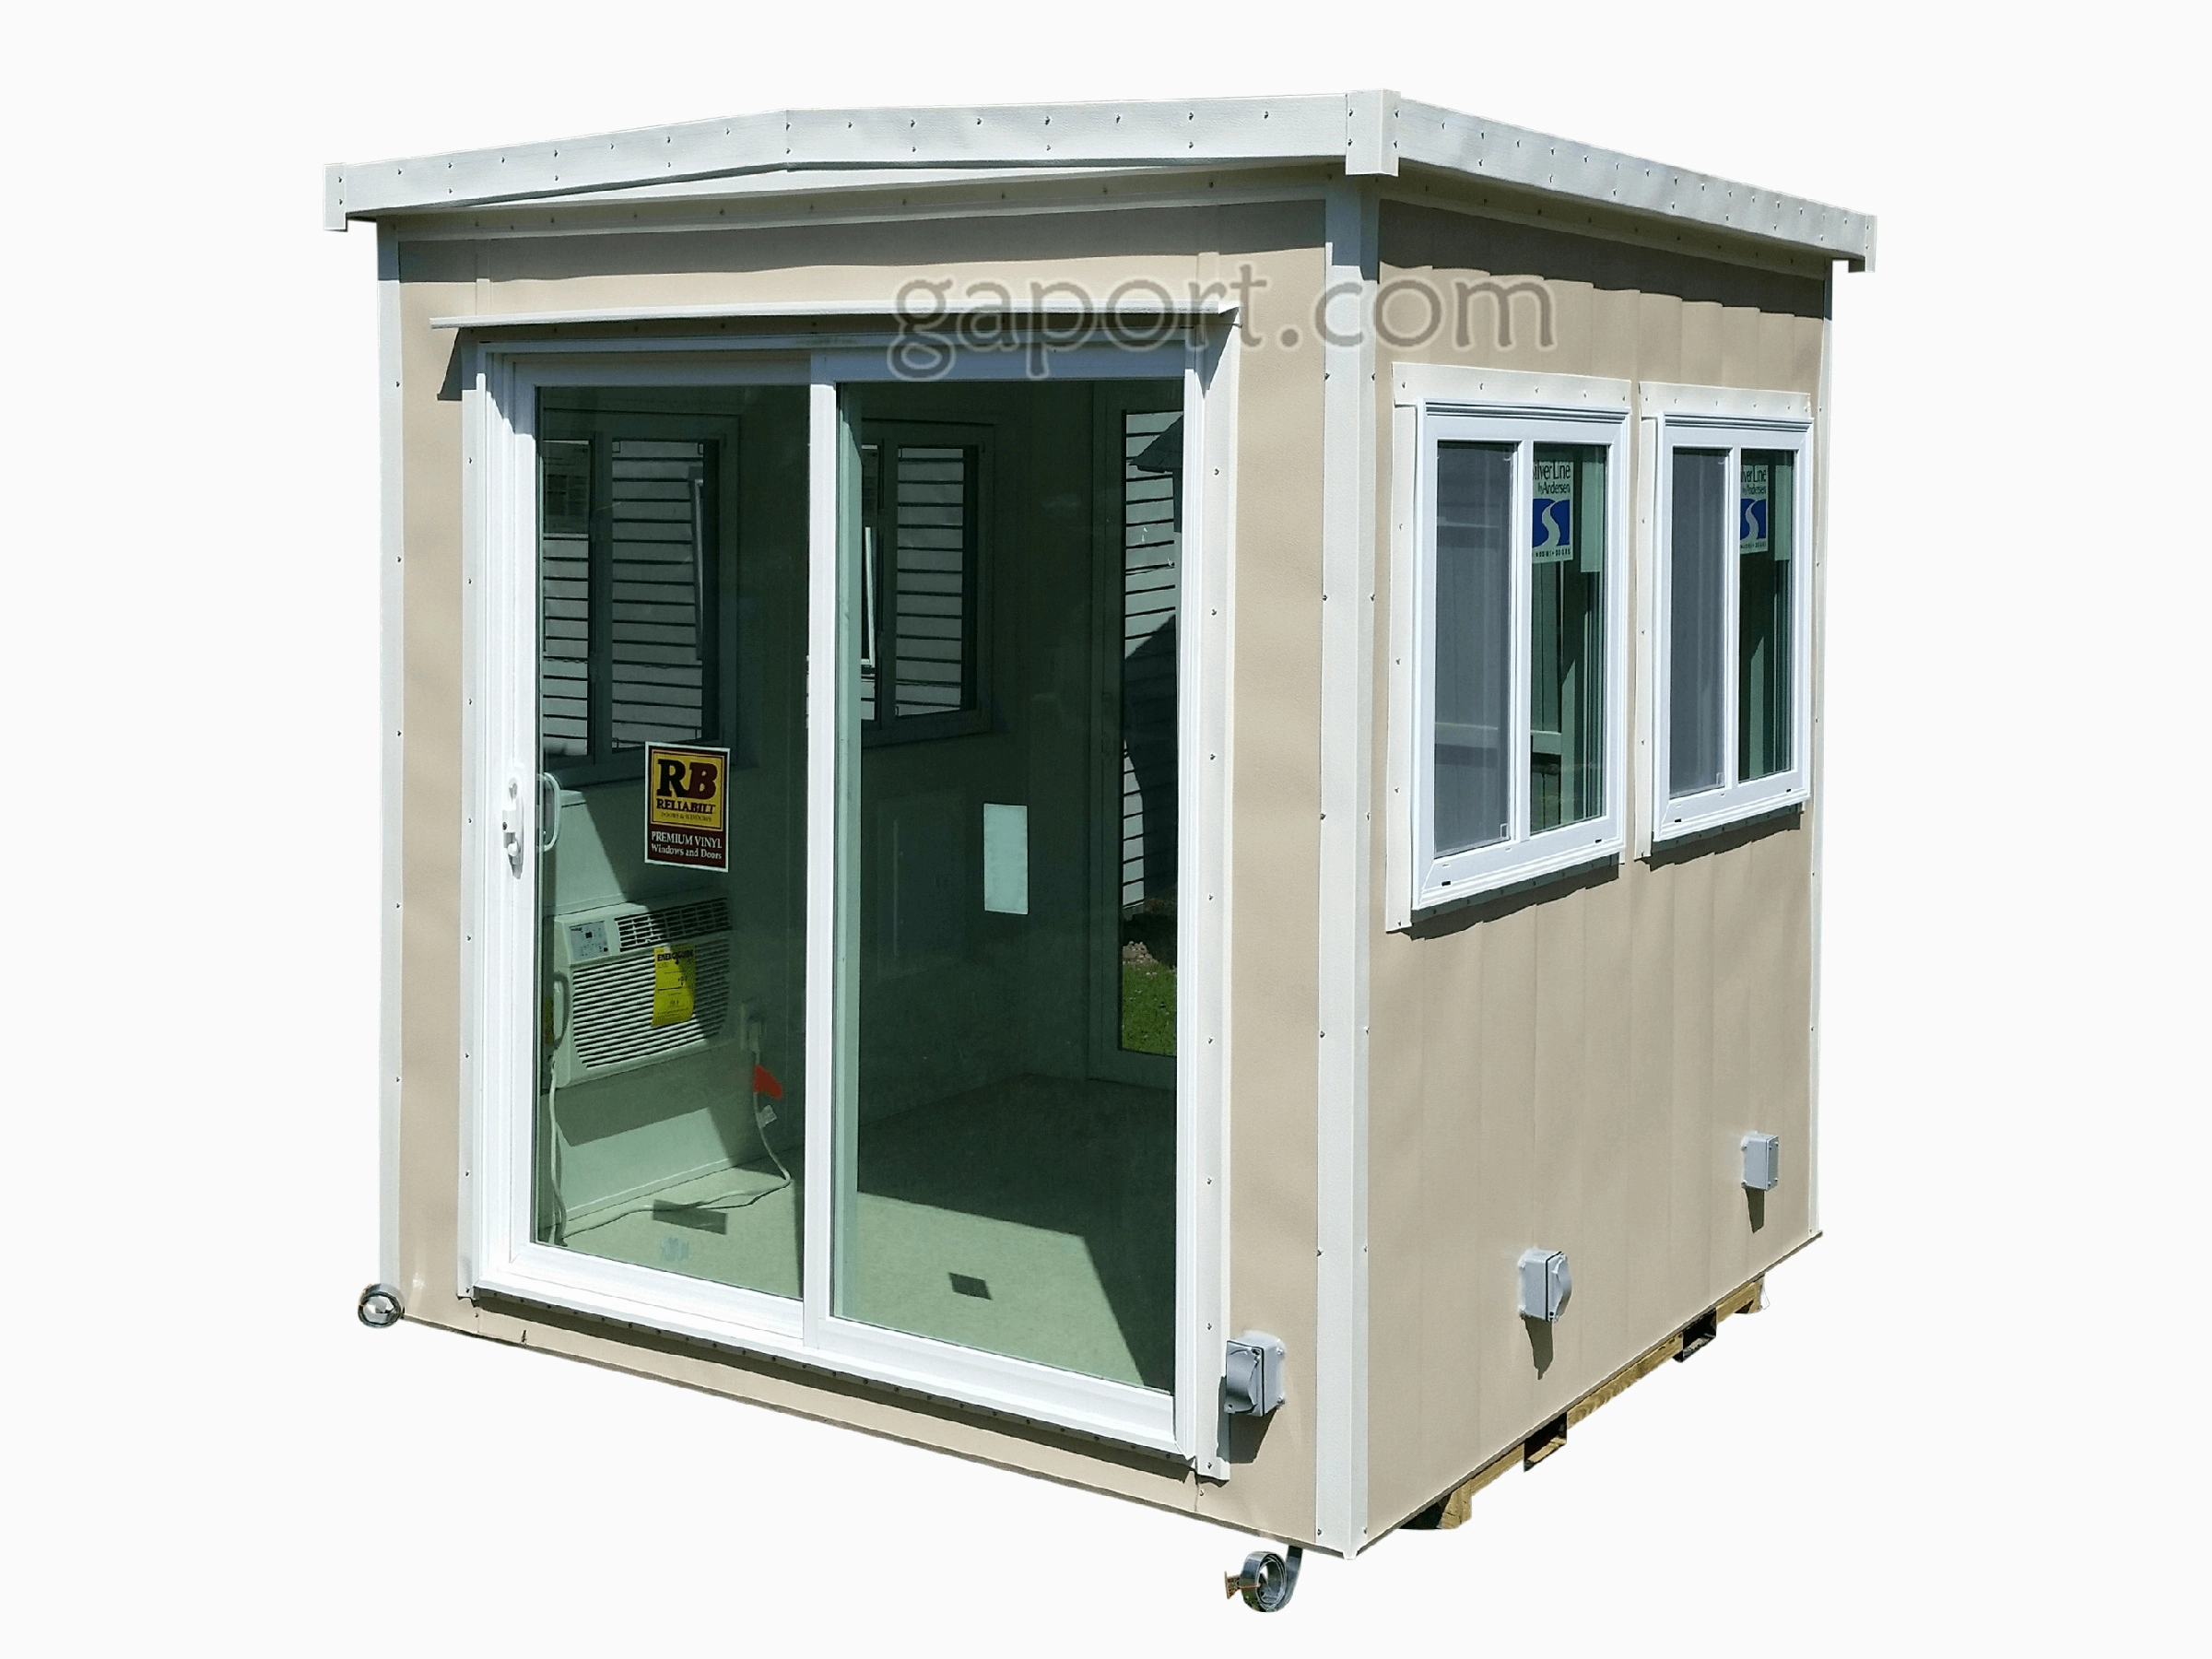 8x8 Guard Booth